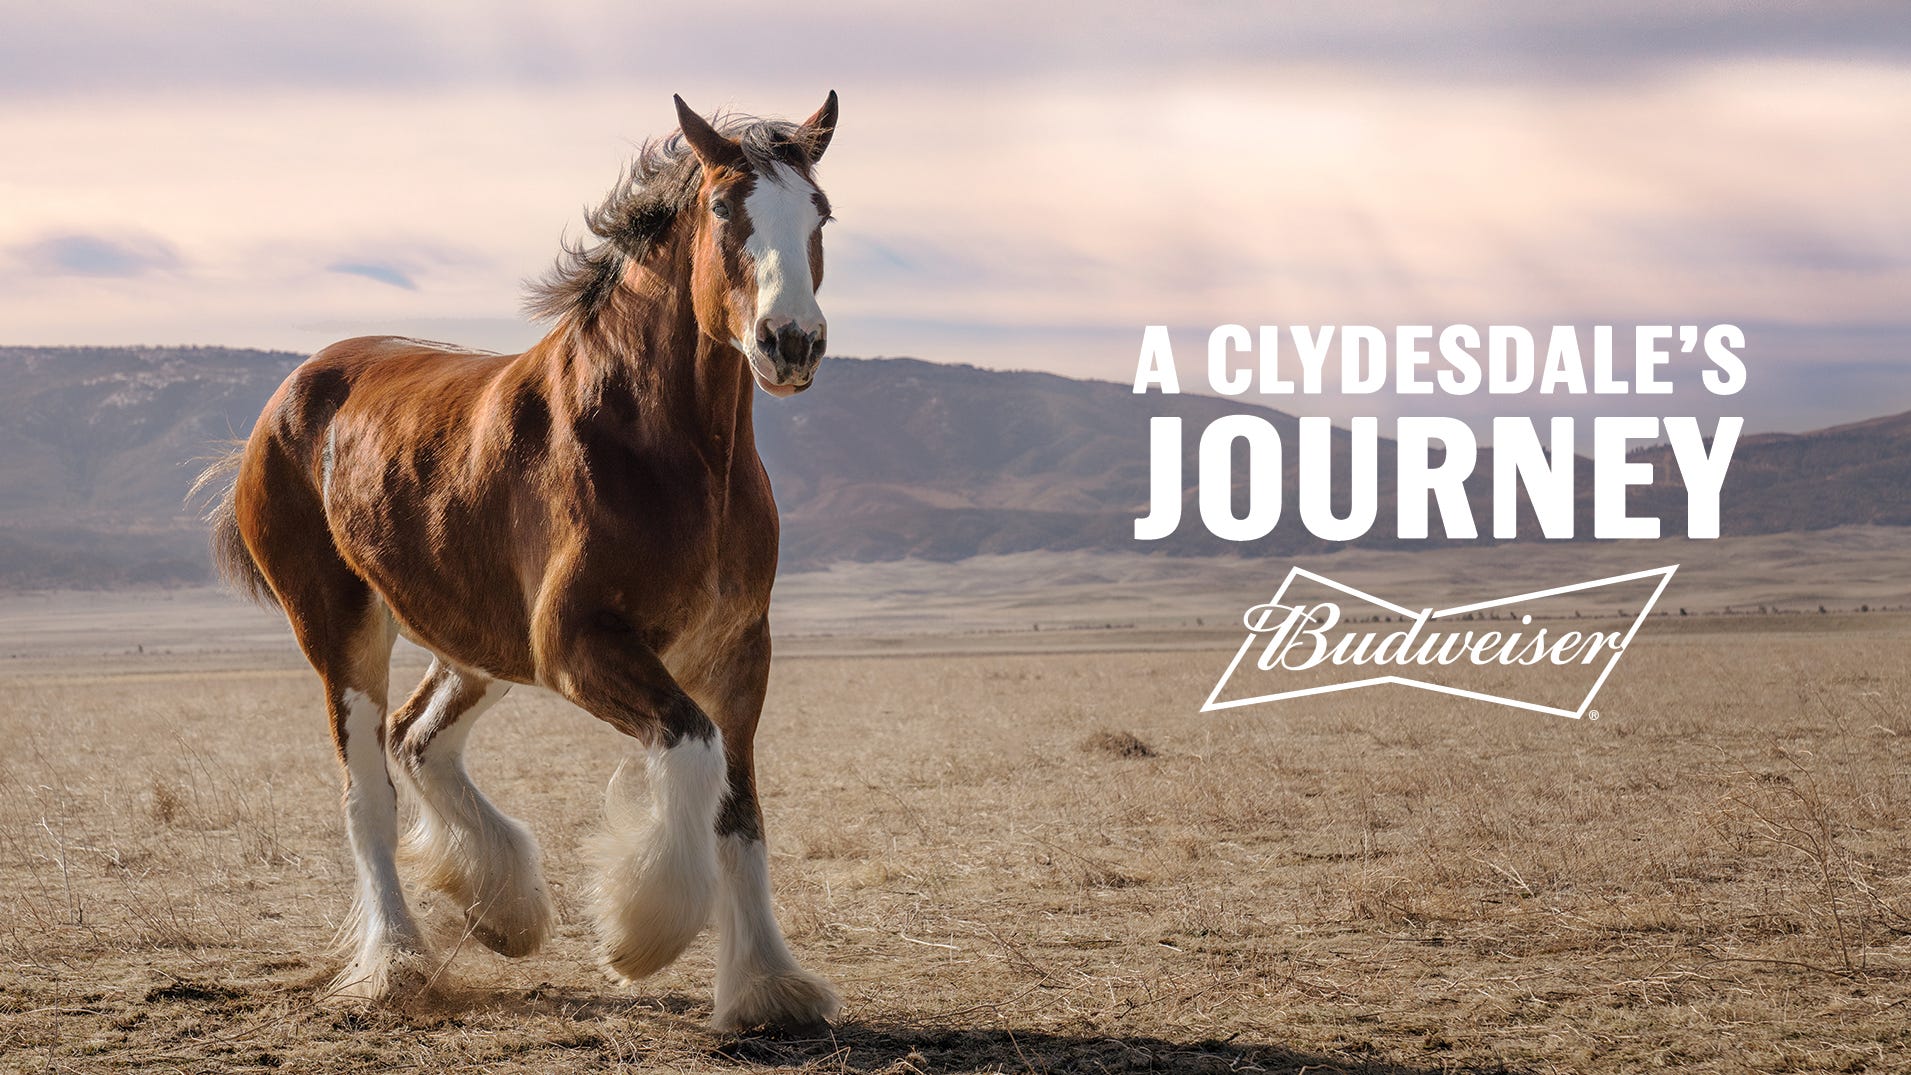 Super Bowl commercials 2022: Clydesdales give hope in Budweiser return